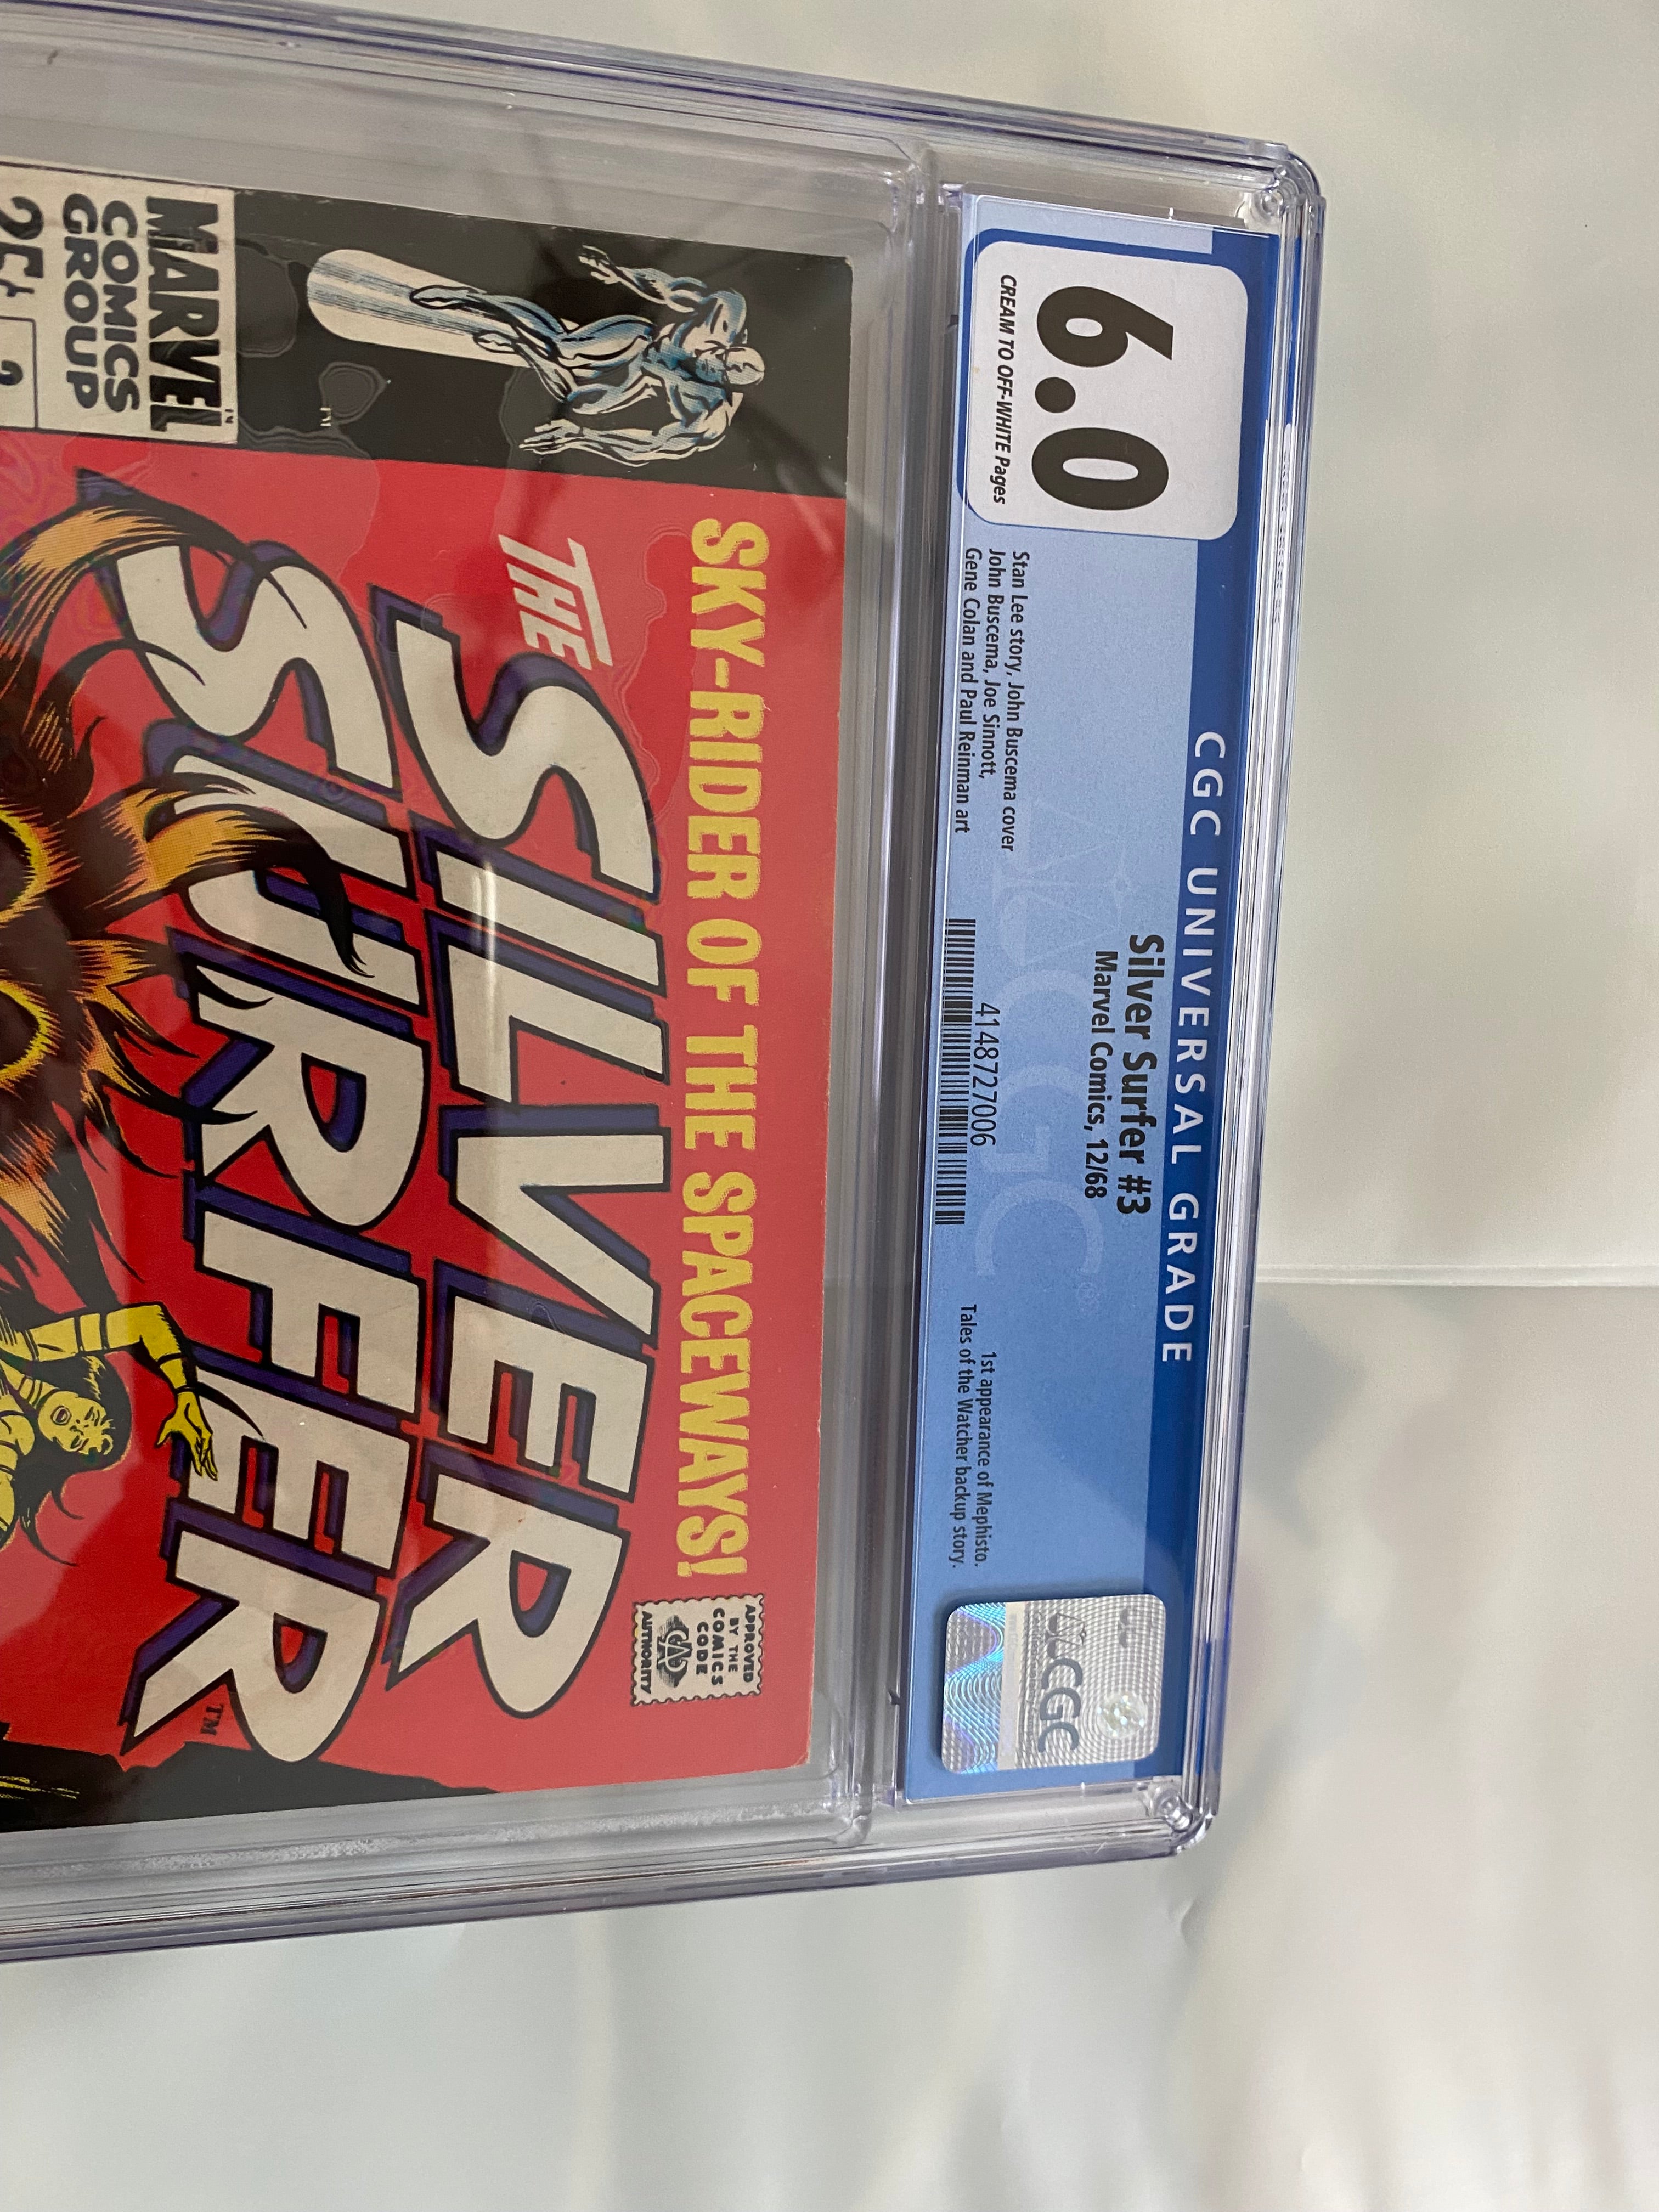 Silver Surfer #3 CGC 6.0 1st Appearance Mephisto | L.A. Mood Comics and Games